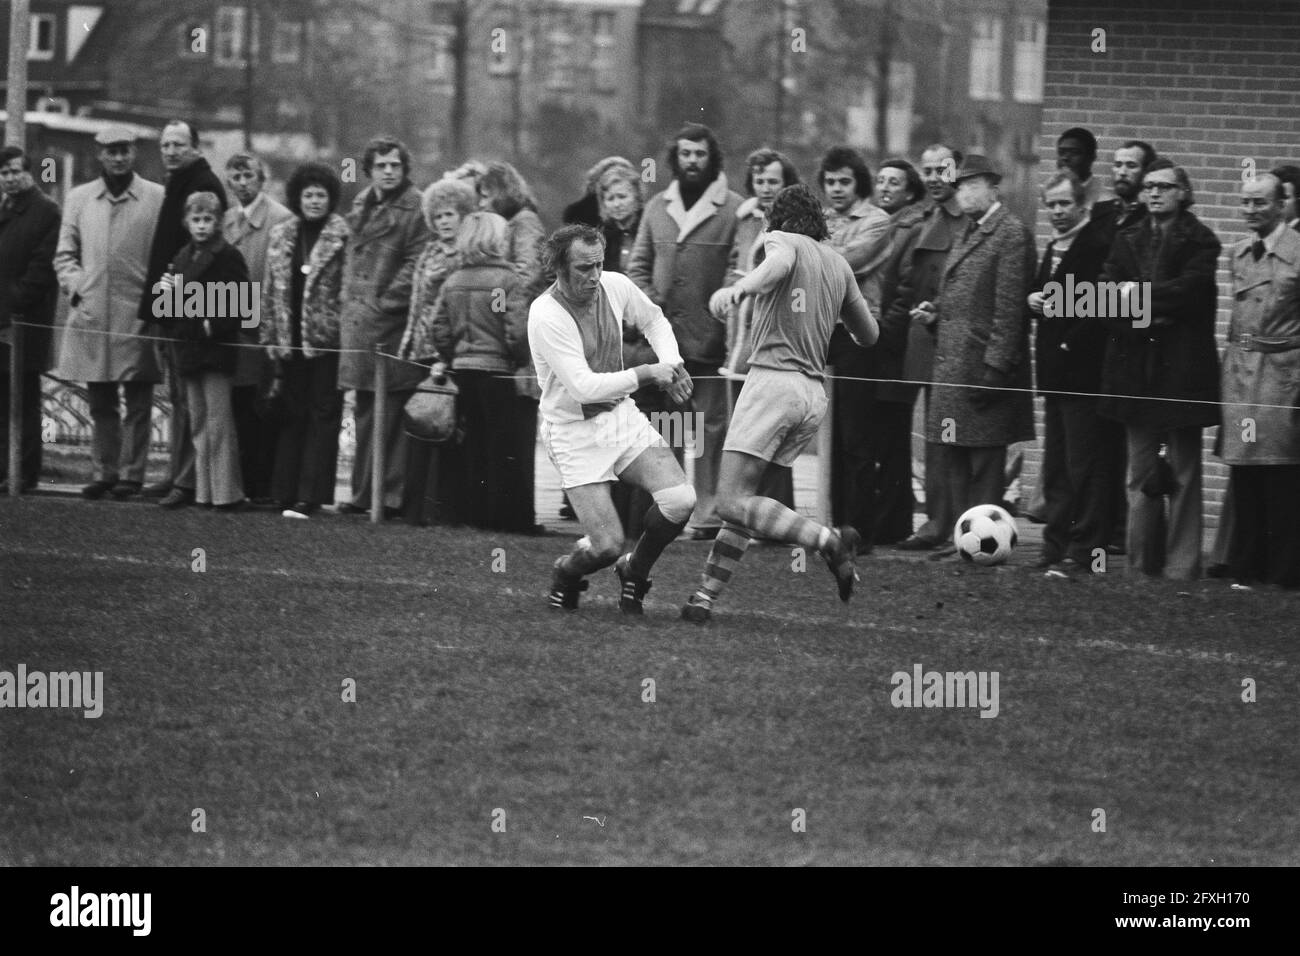 Soccer match Volewijckers against Rosveld, babies, January 1, 1975, sports, soccer, The Netherlands, 20th century press agency photo, news to remember, documentary, historic photography 1945-1990, visual stories, human history of the Twentieth Century, capturing moments in time Stock Photo